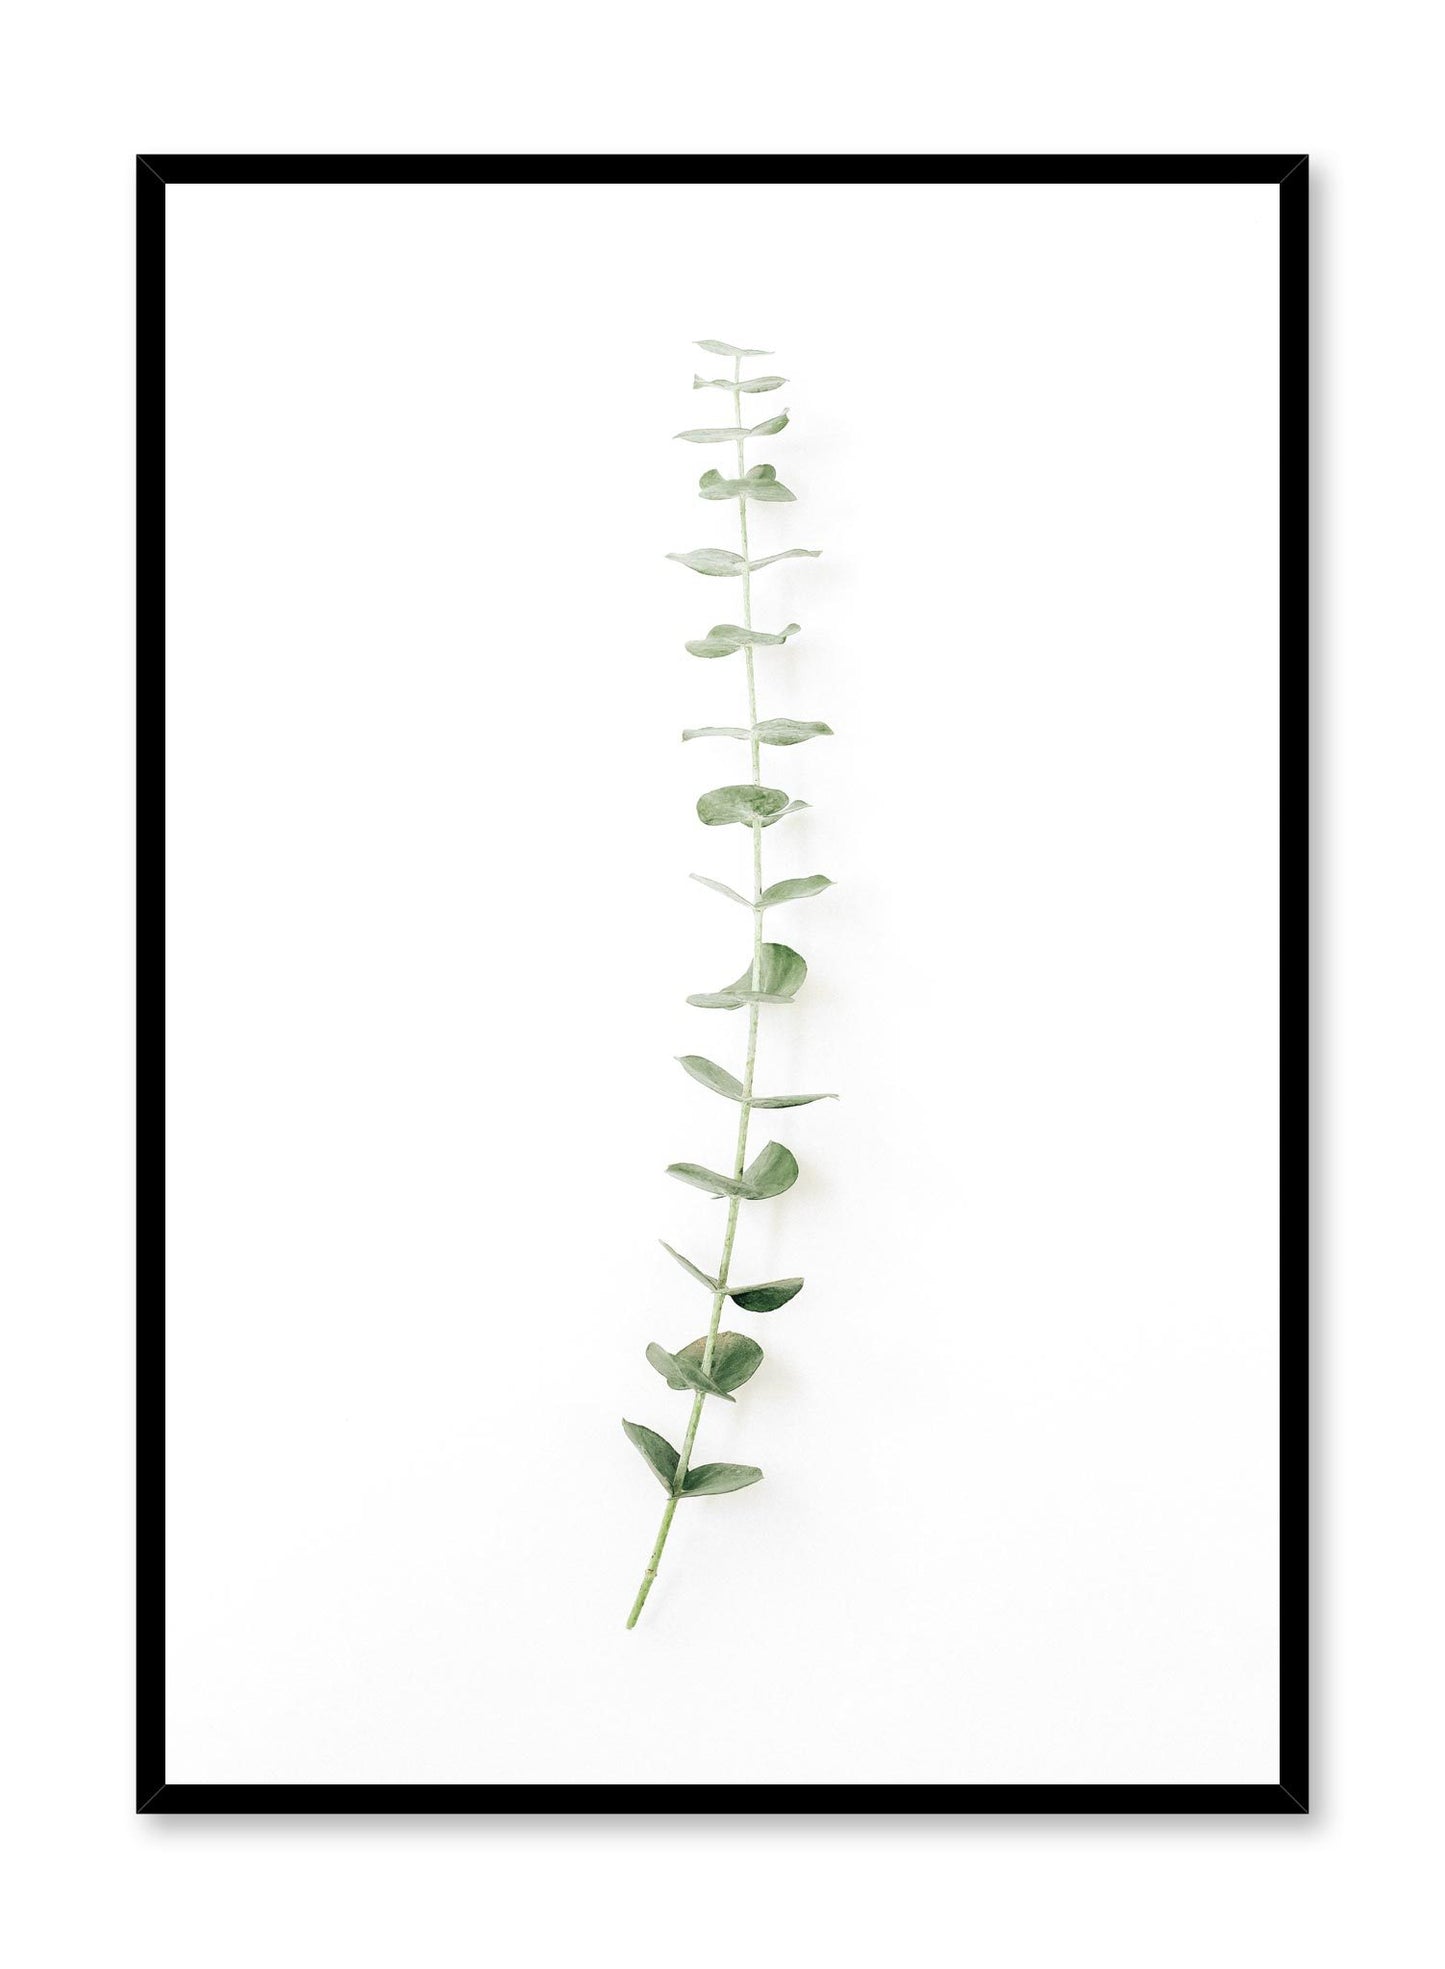 Minimalistic wall poster by Opposite Wall with eucalyptus stem photography